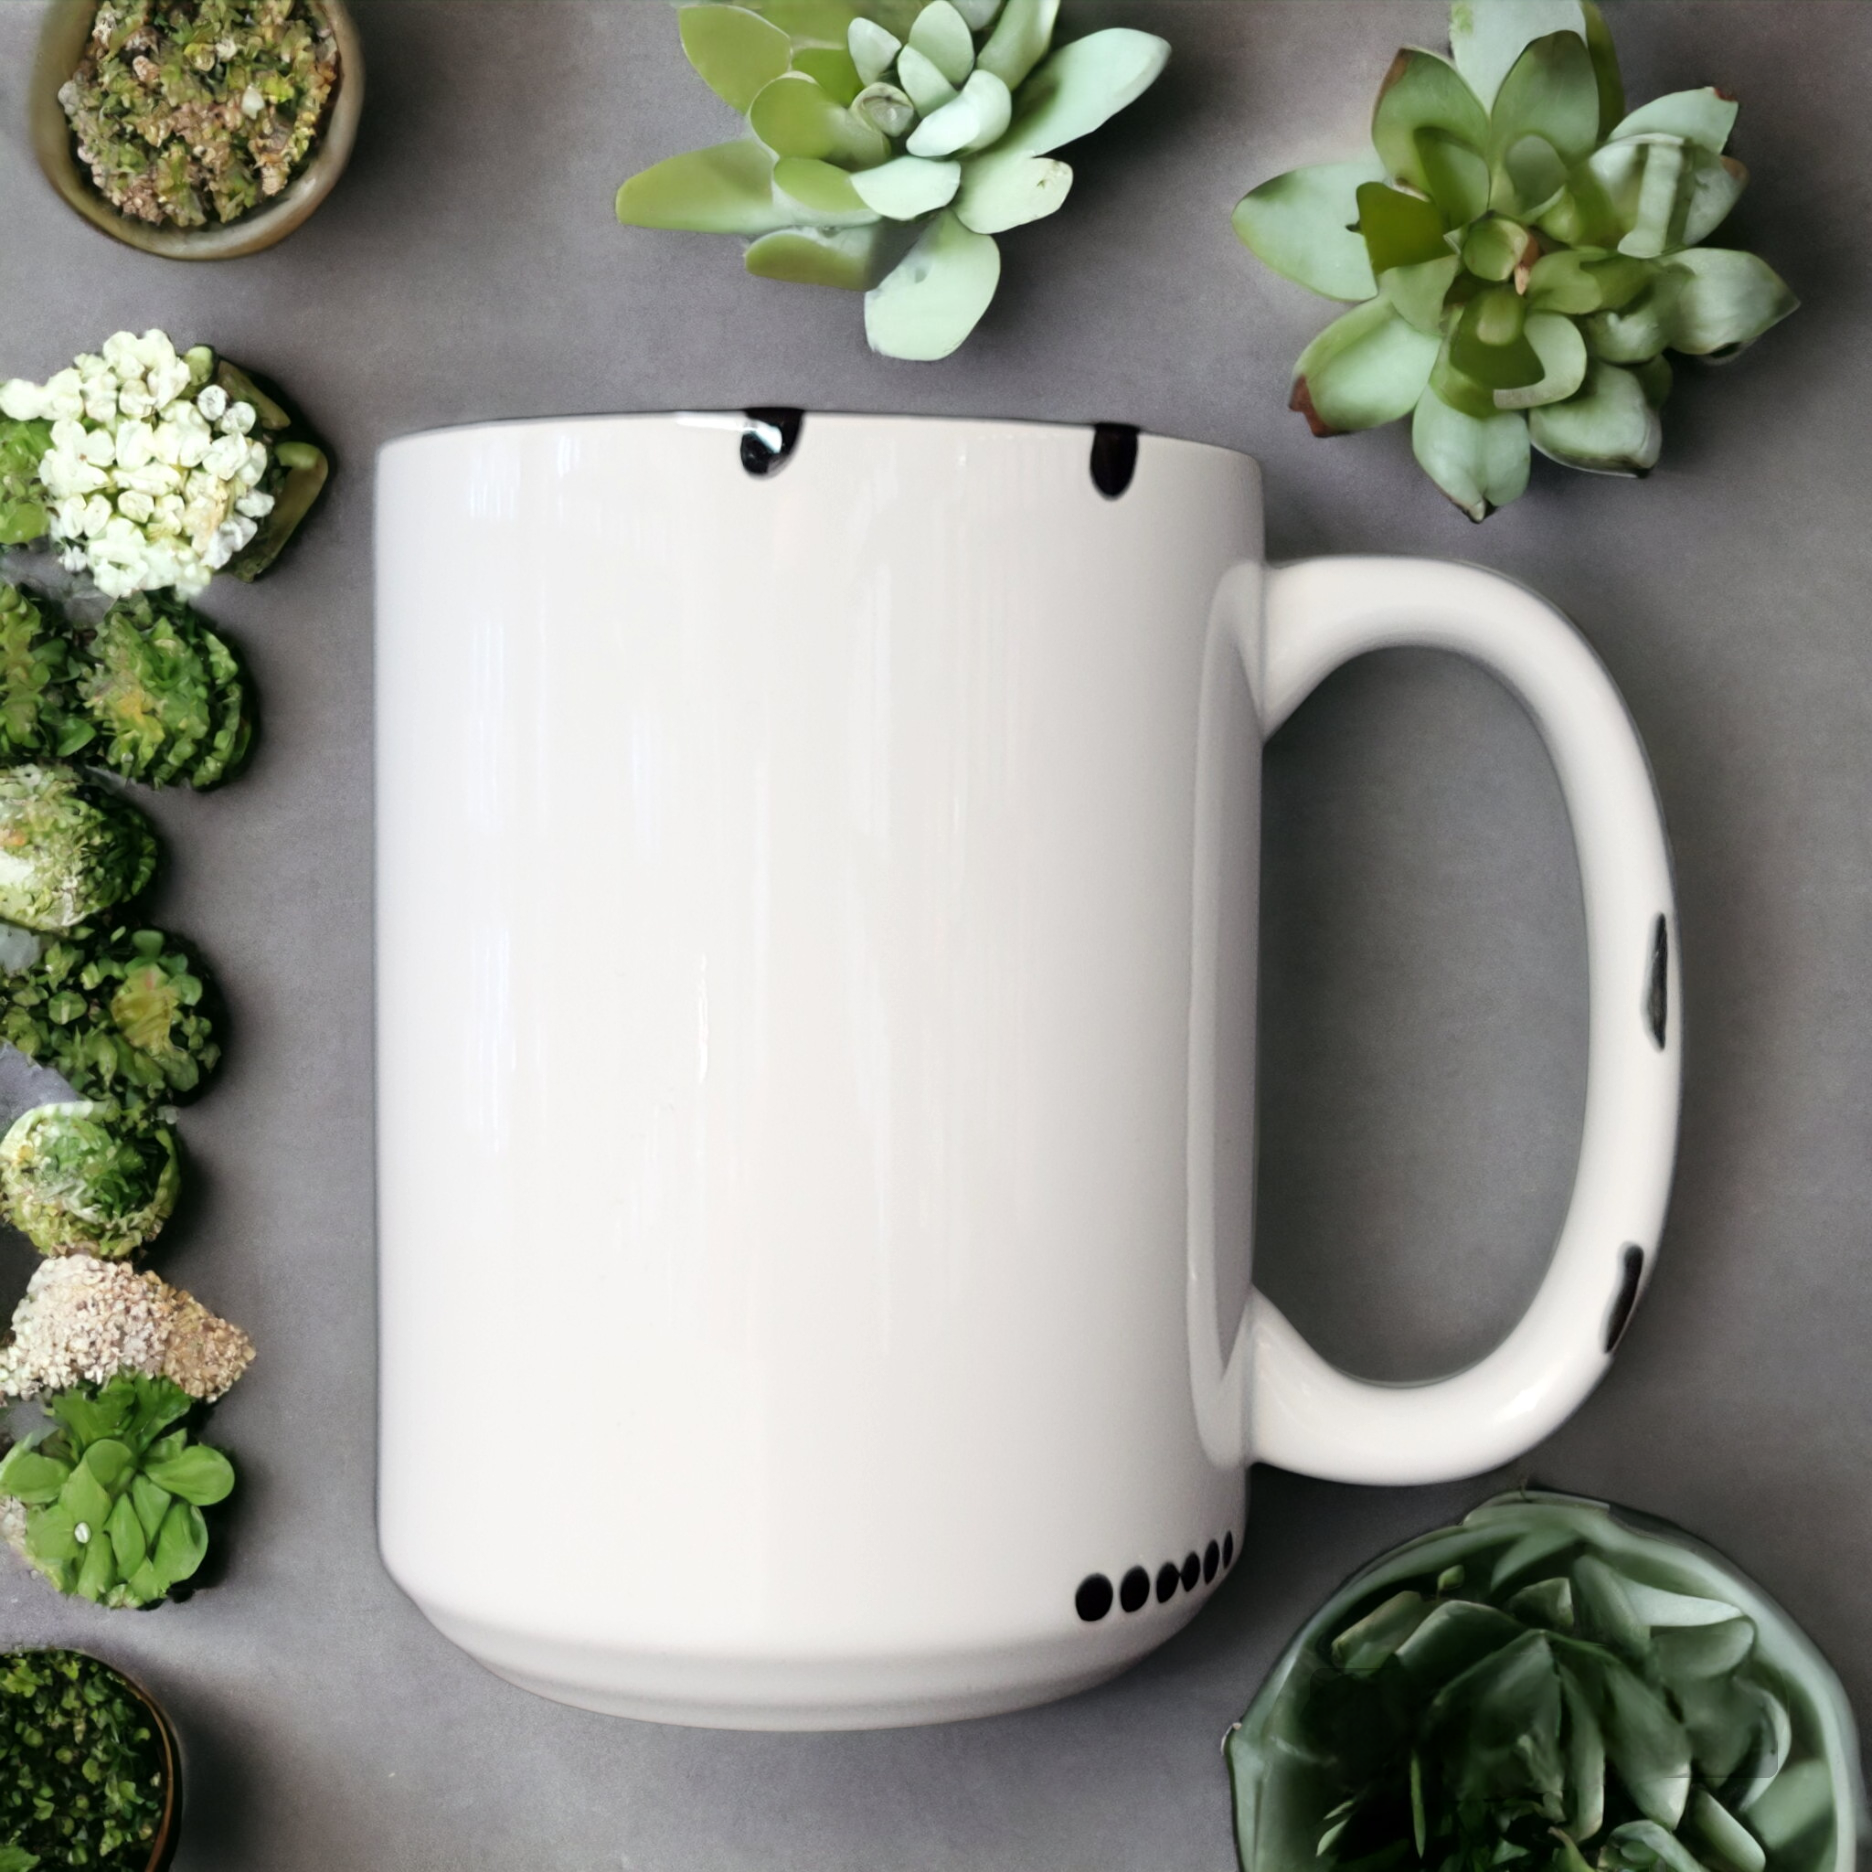 Your Best Friend | Mug - The Pretty Things.ca